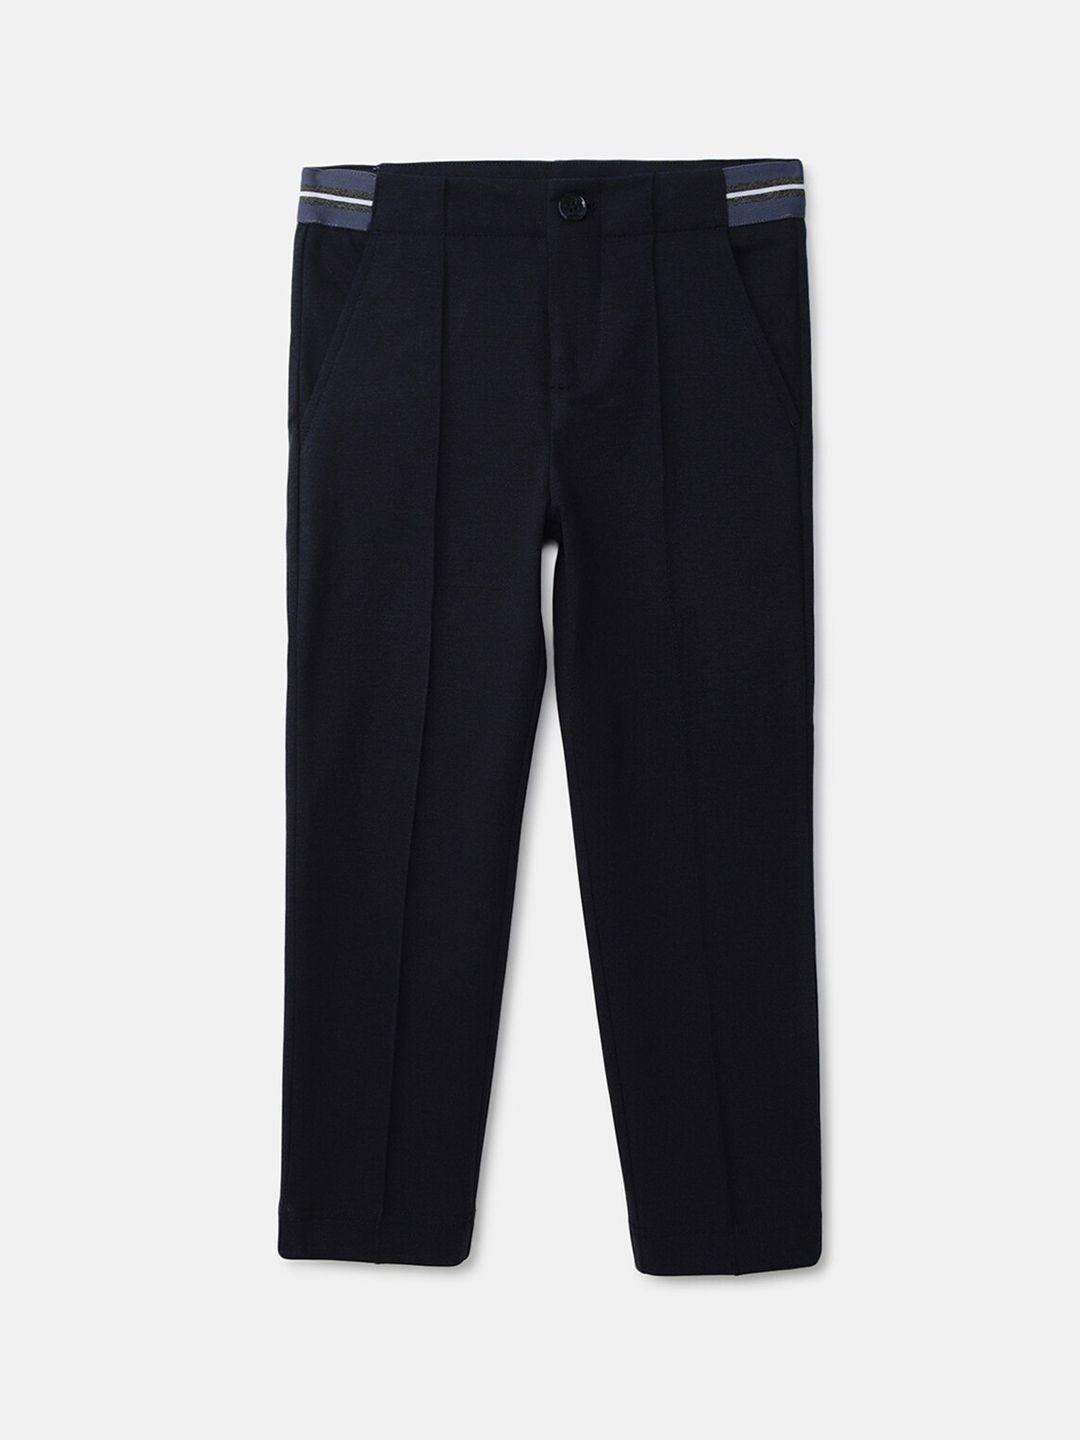 united colors of benetton boys black slim fit pleated trousers